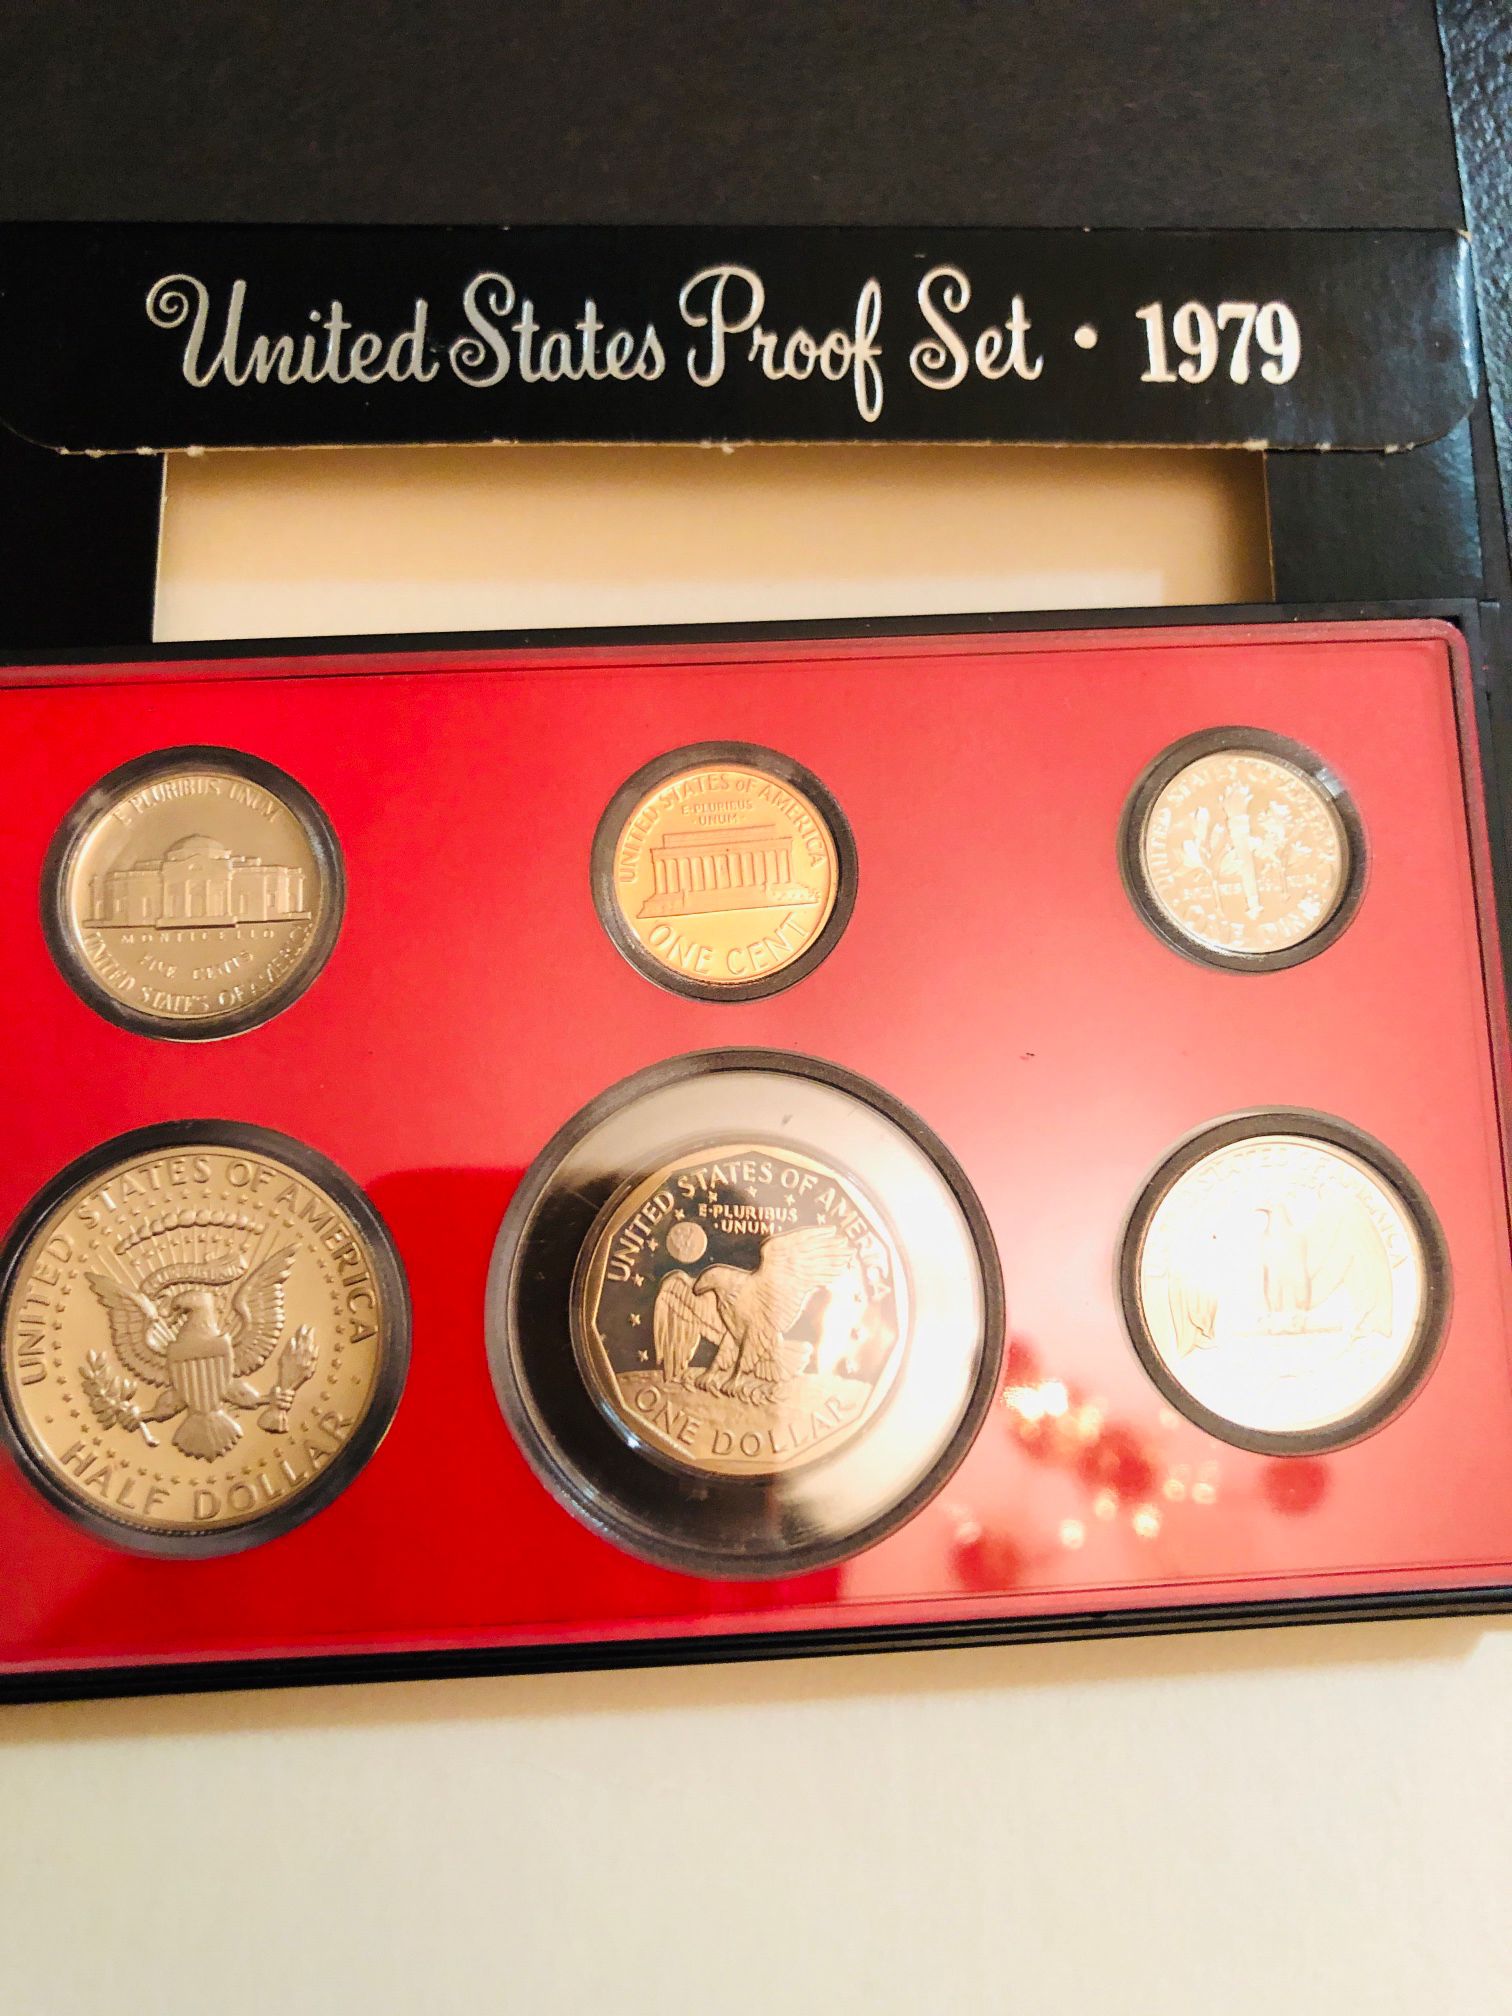 1979 Type 2 The One Dollar Coin Is Different And Rare On This United States Proof Coins Set 6 Coins 